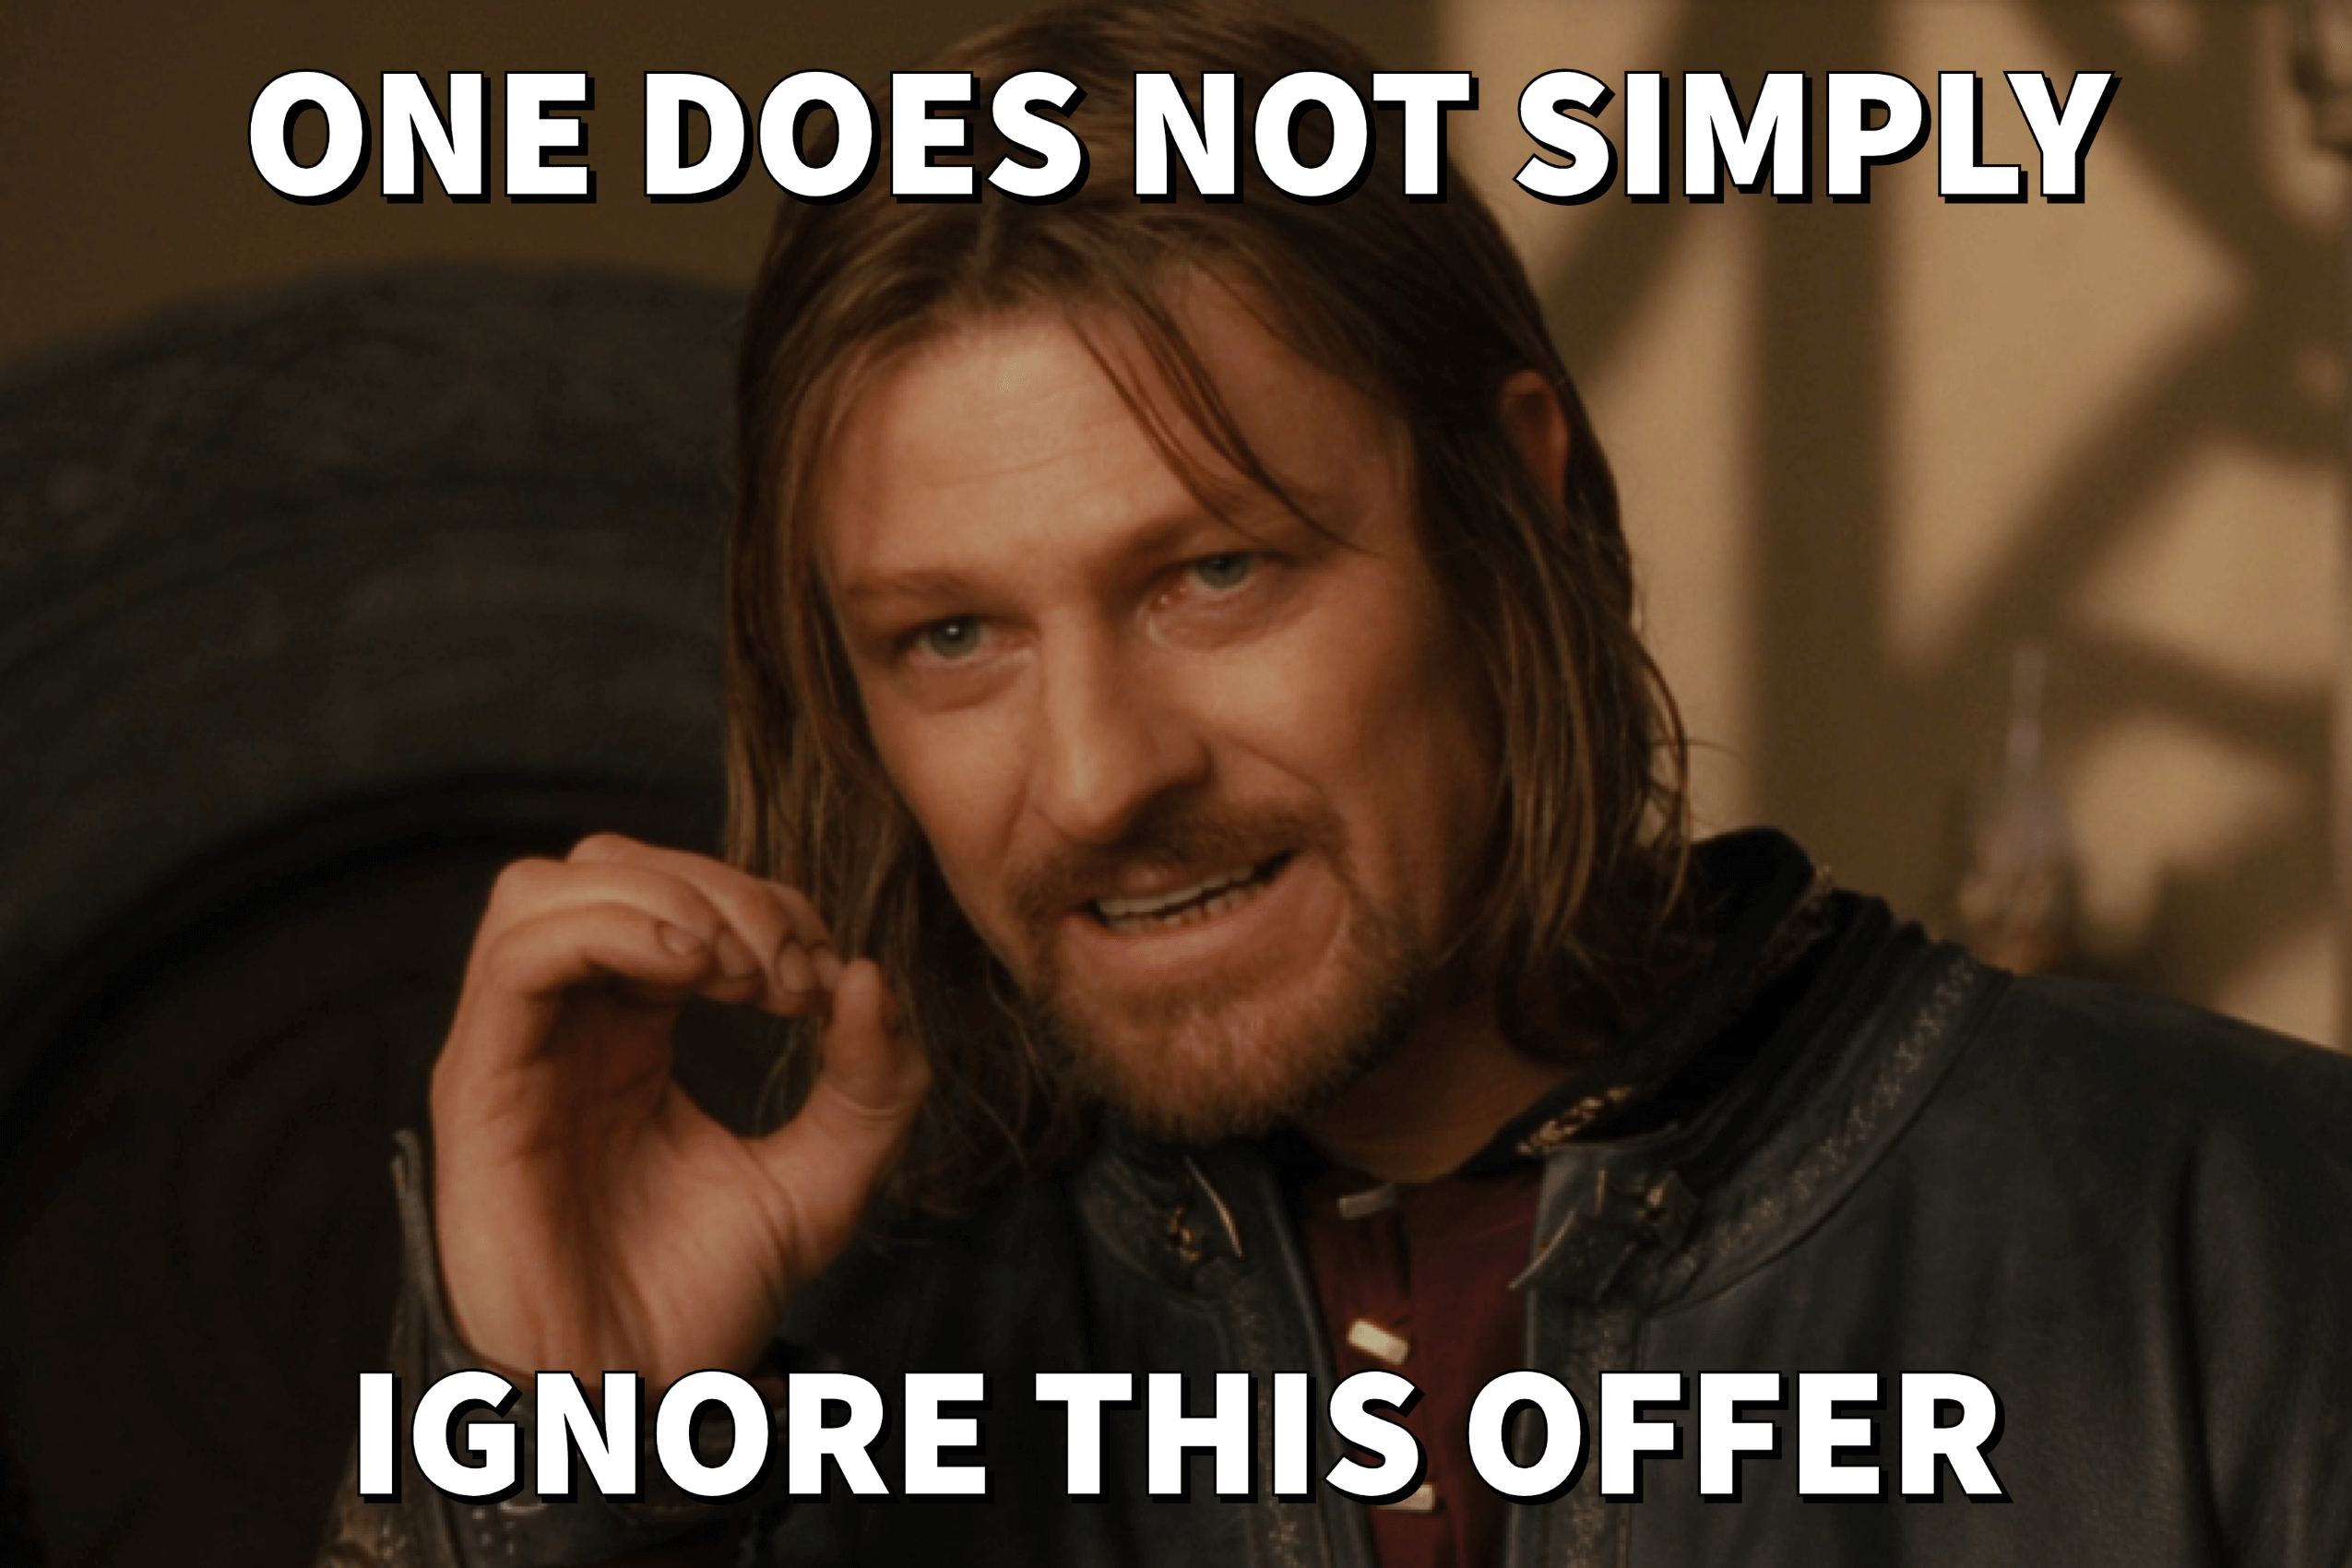 One does not simply ignore this offer